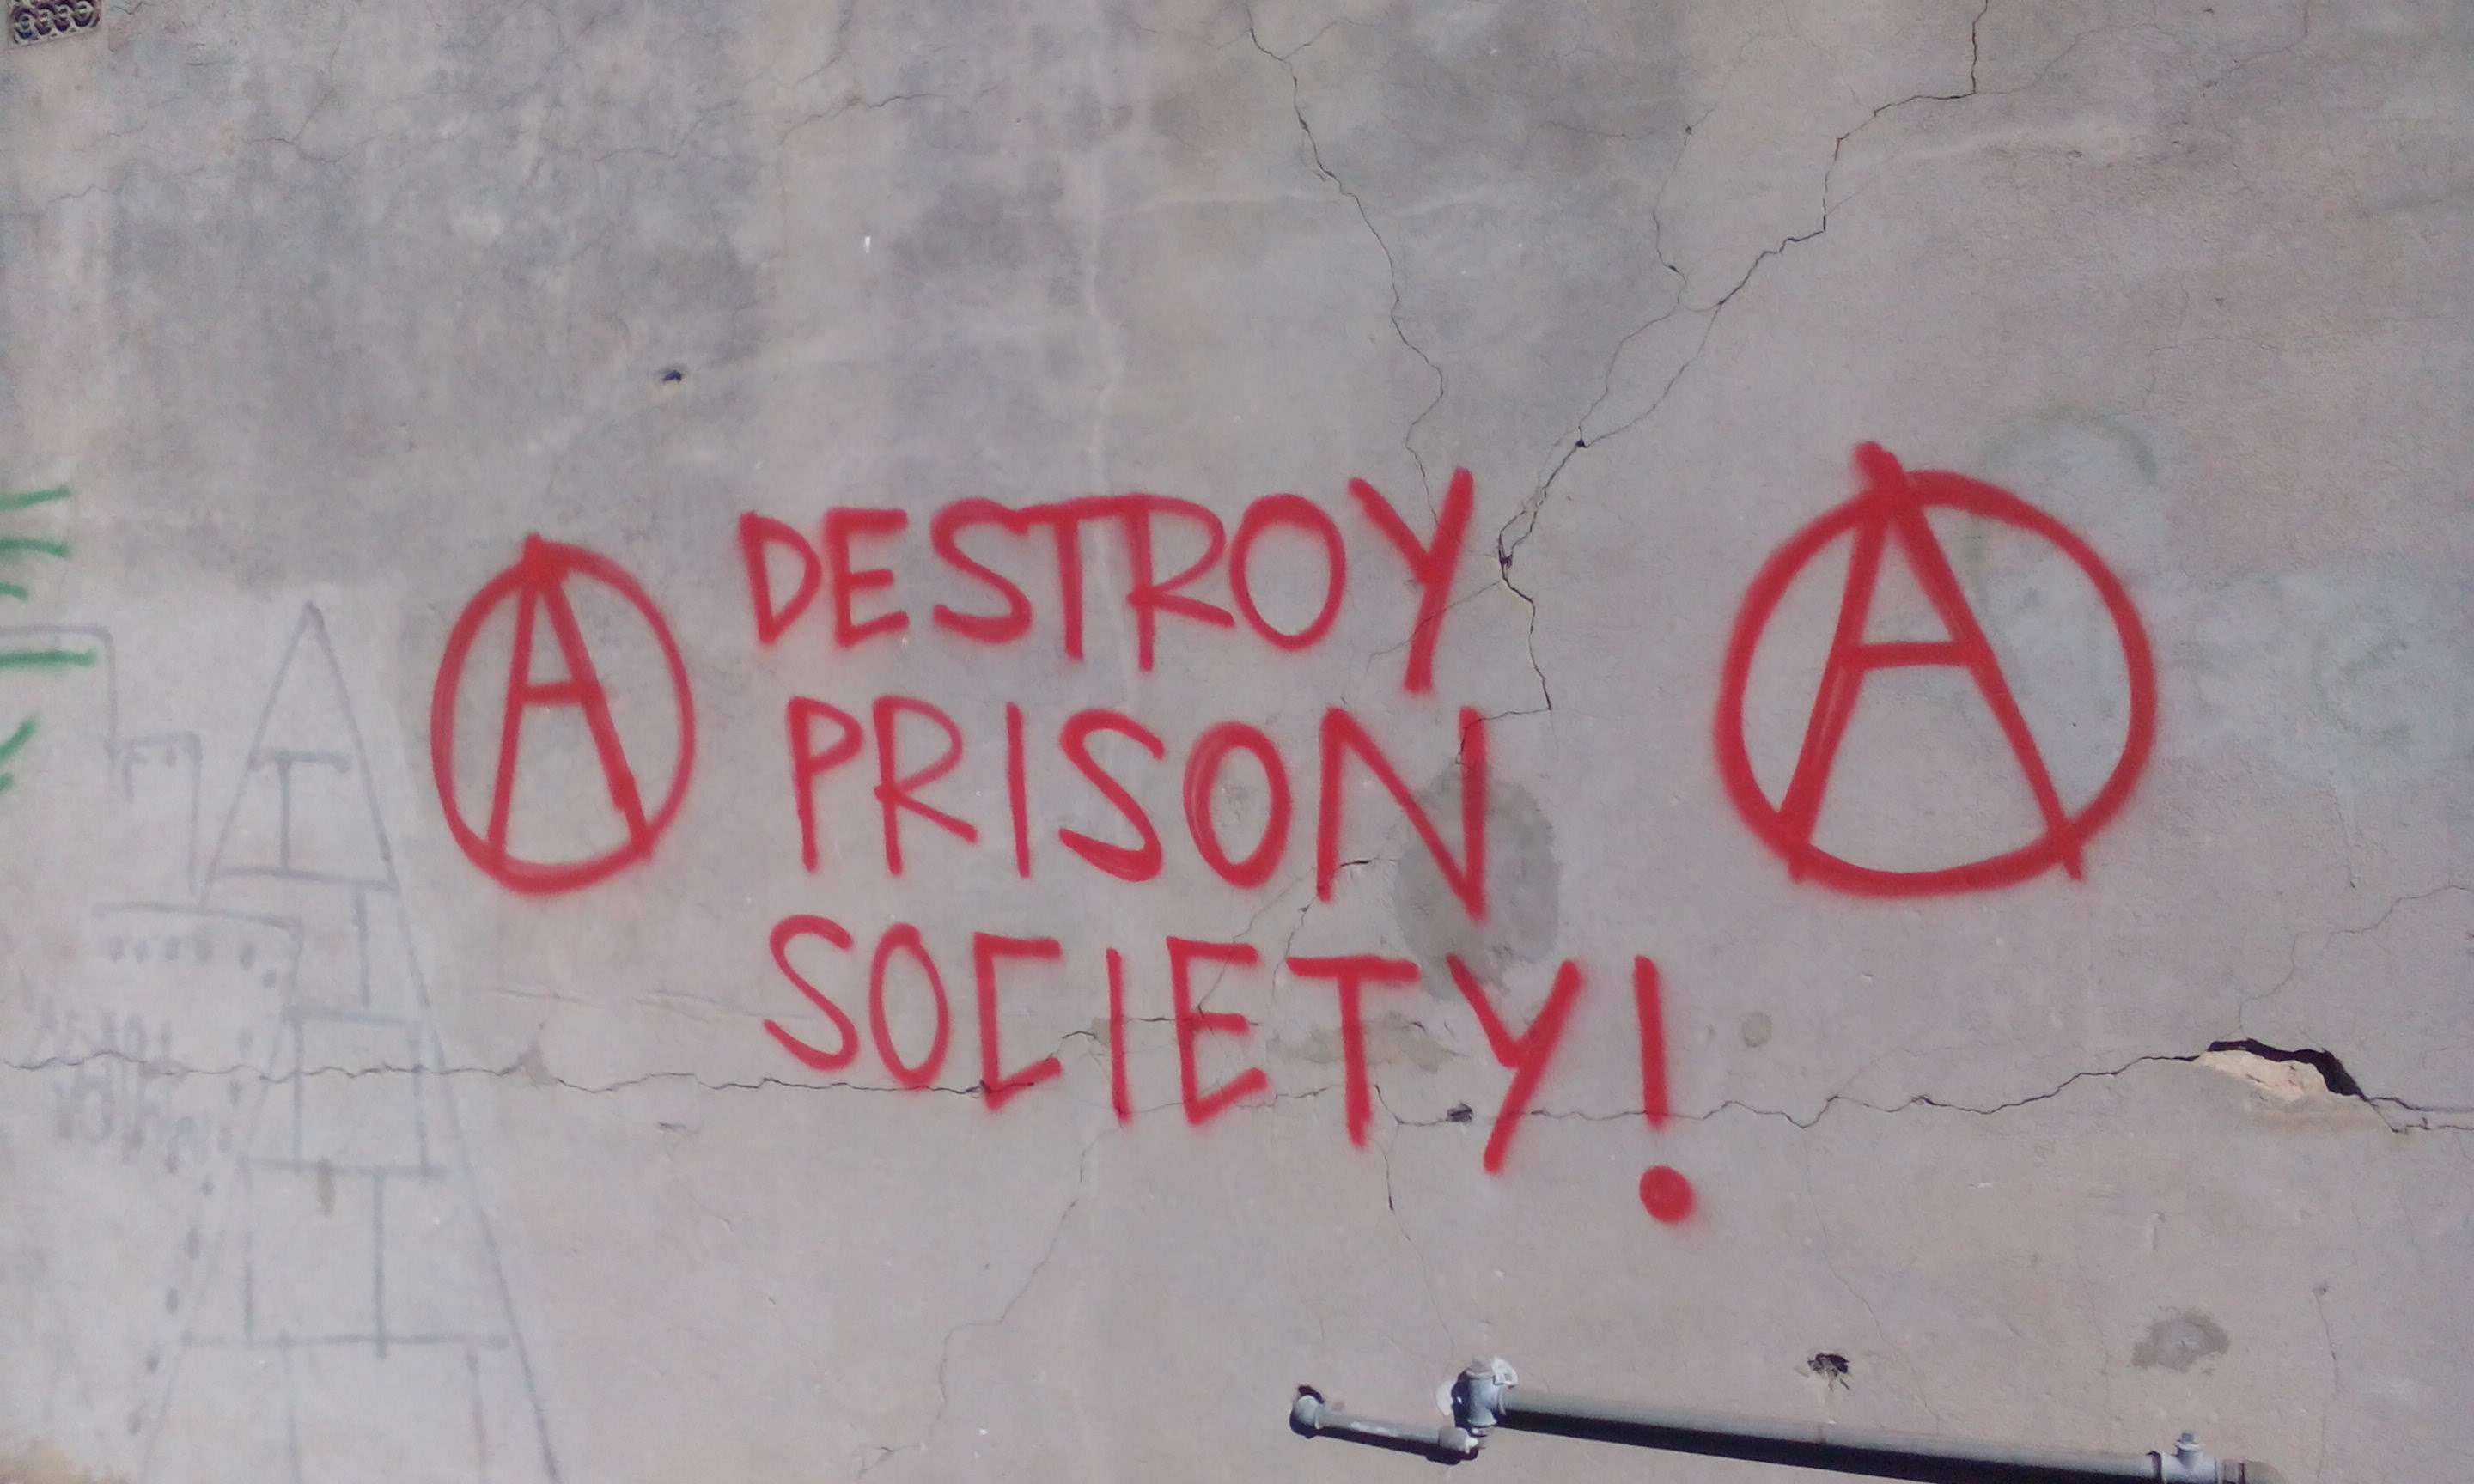 Narrm/Melbourne: Graffiti for the Week of International Solidarity with Anarchist Prisoners